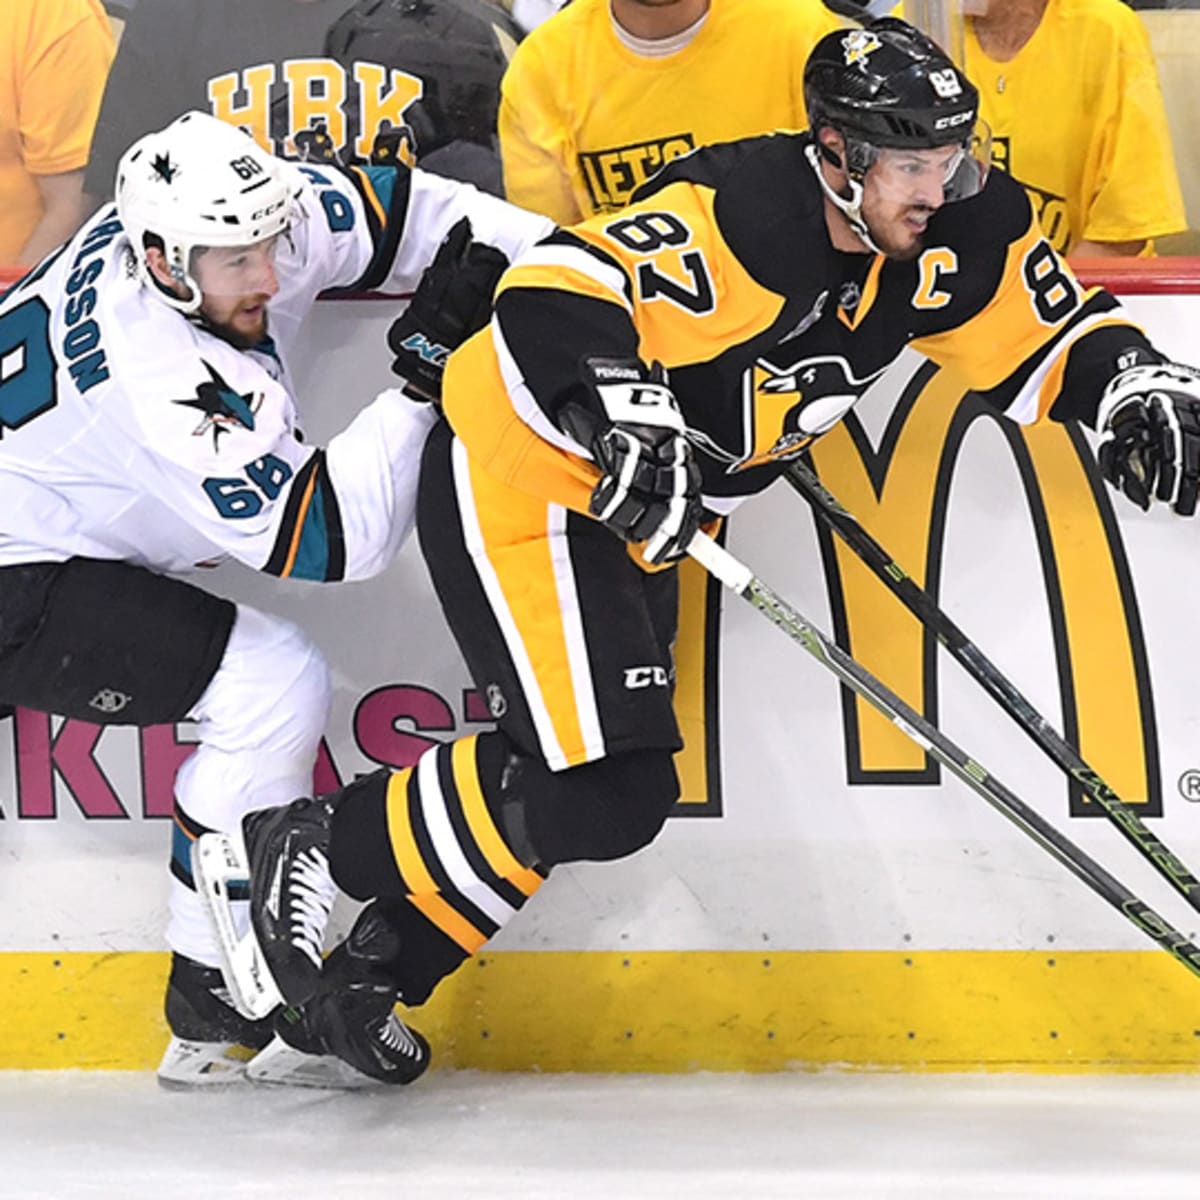 Freeze Frame: Penguins' Evgeni Malkin out of the box and on the board